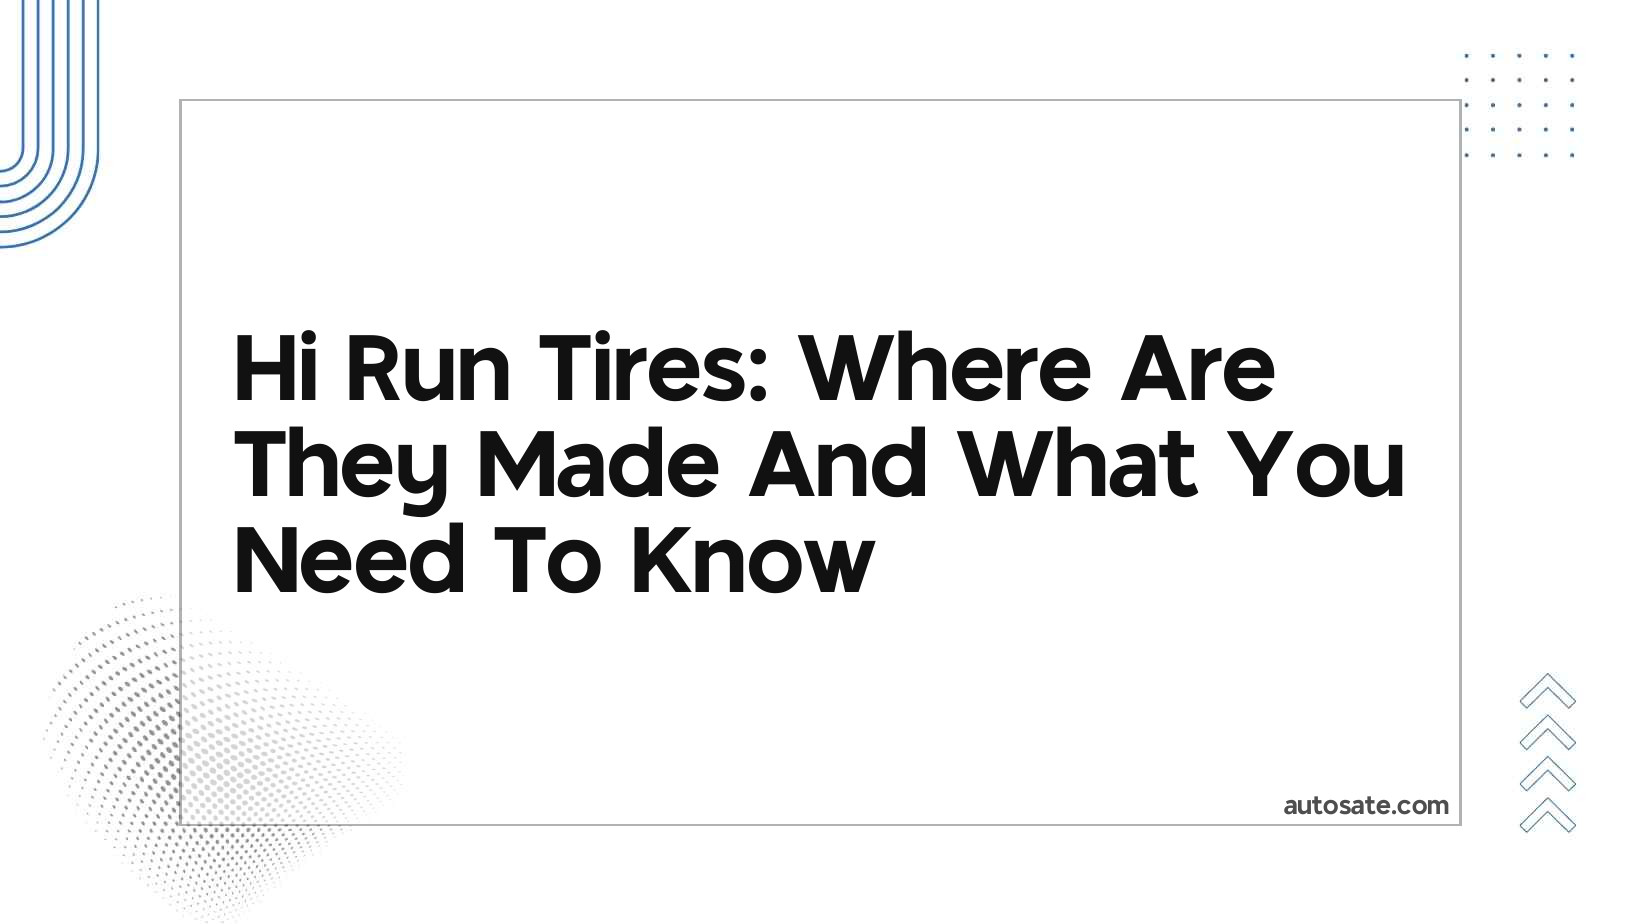 Hi Run Tires: Where Are They Made And What You Need To Know